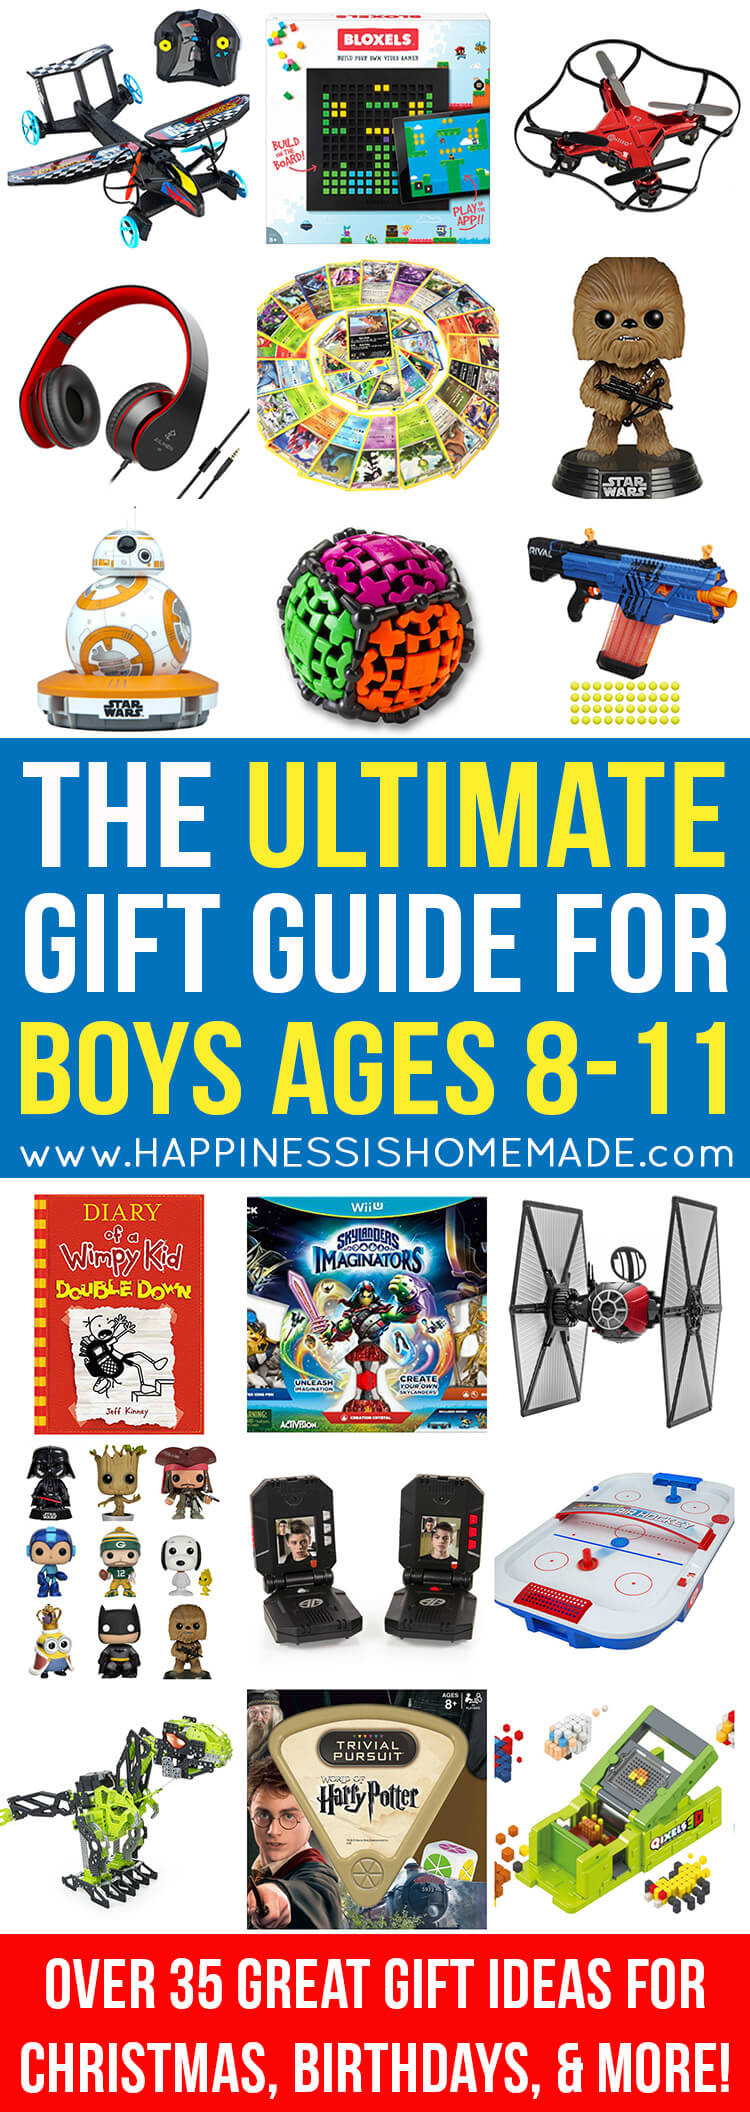 Gift Ideas For Boys Age 10
 The Best Gift Ideas for Boys Ages 8 11 Happiness is Homemade